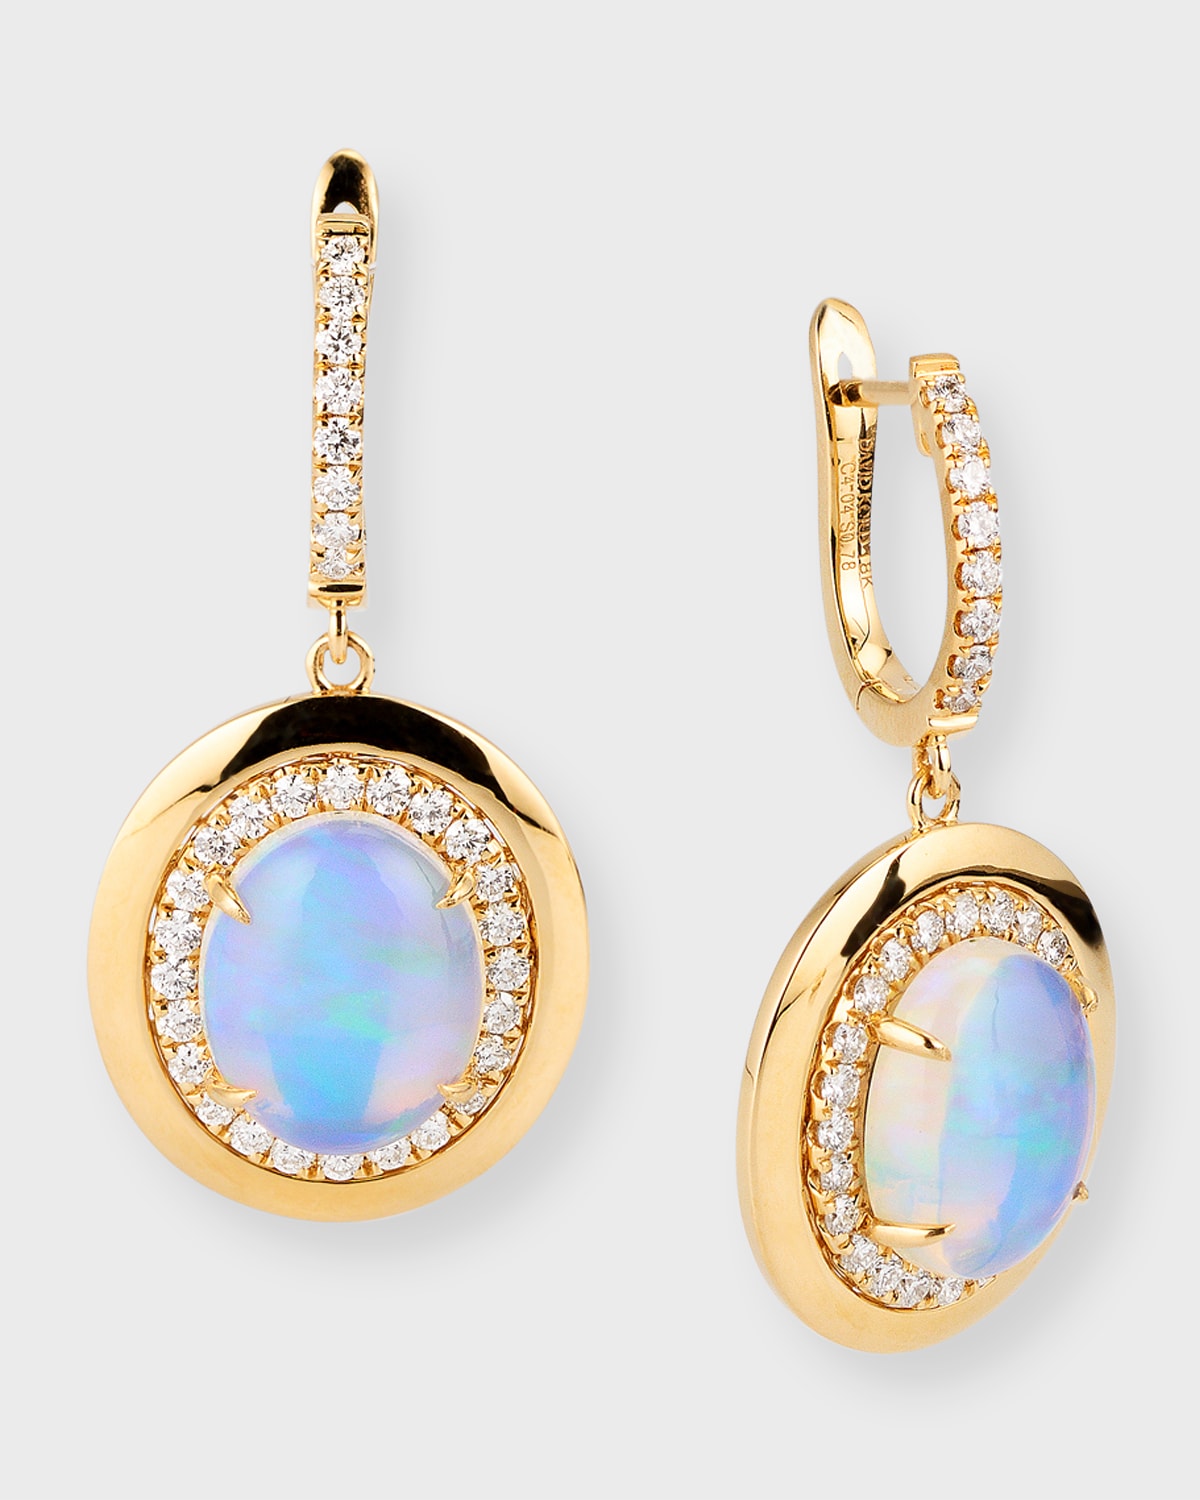 18K Yellow Gold Earrings with Oval-Shape Opal and Diamonds, 4.04tcw